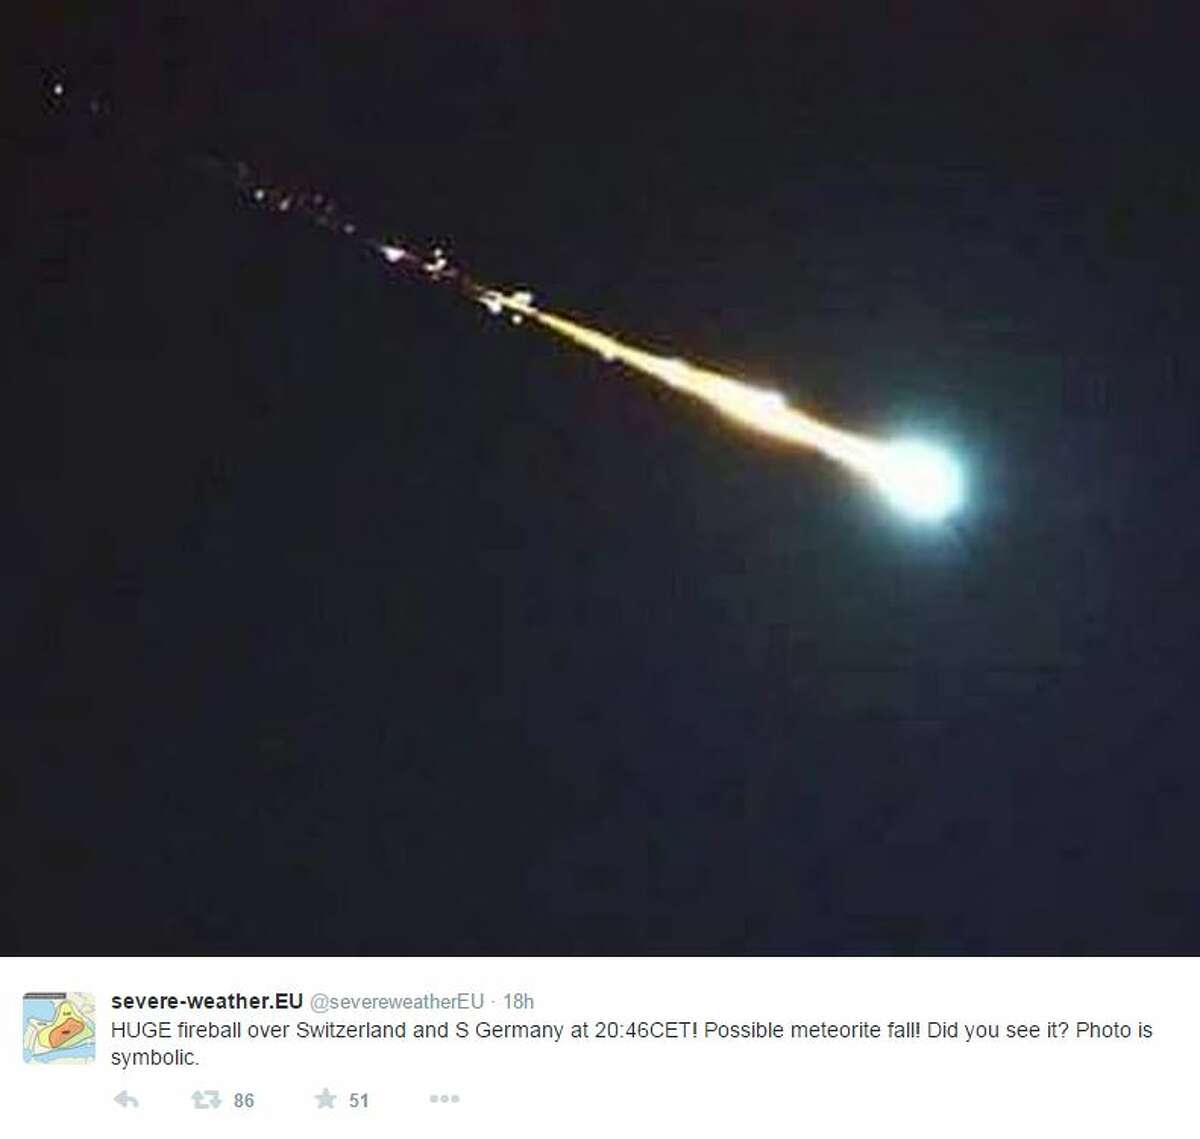 Witnesses in Switzerland reported seeing a "fireball" light up the sky along with hearing "loud explosions."